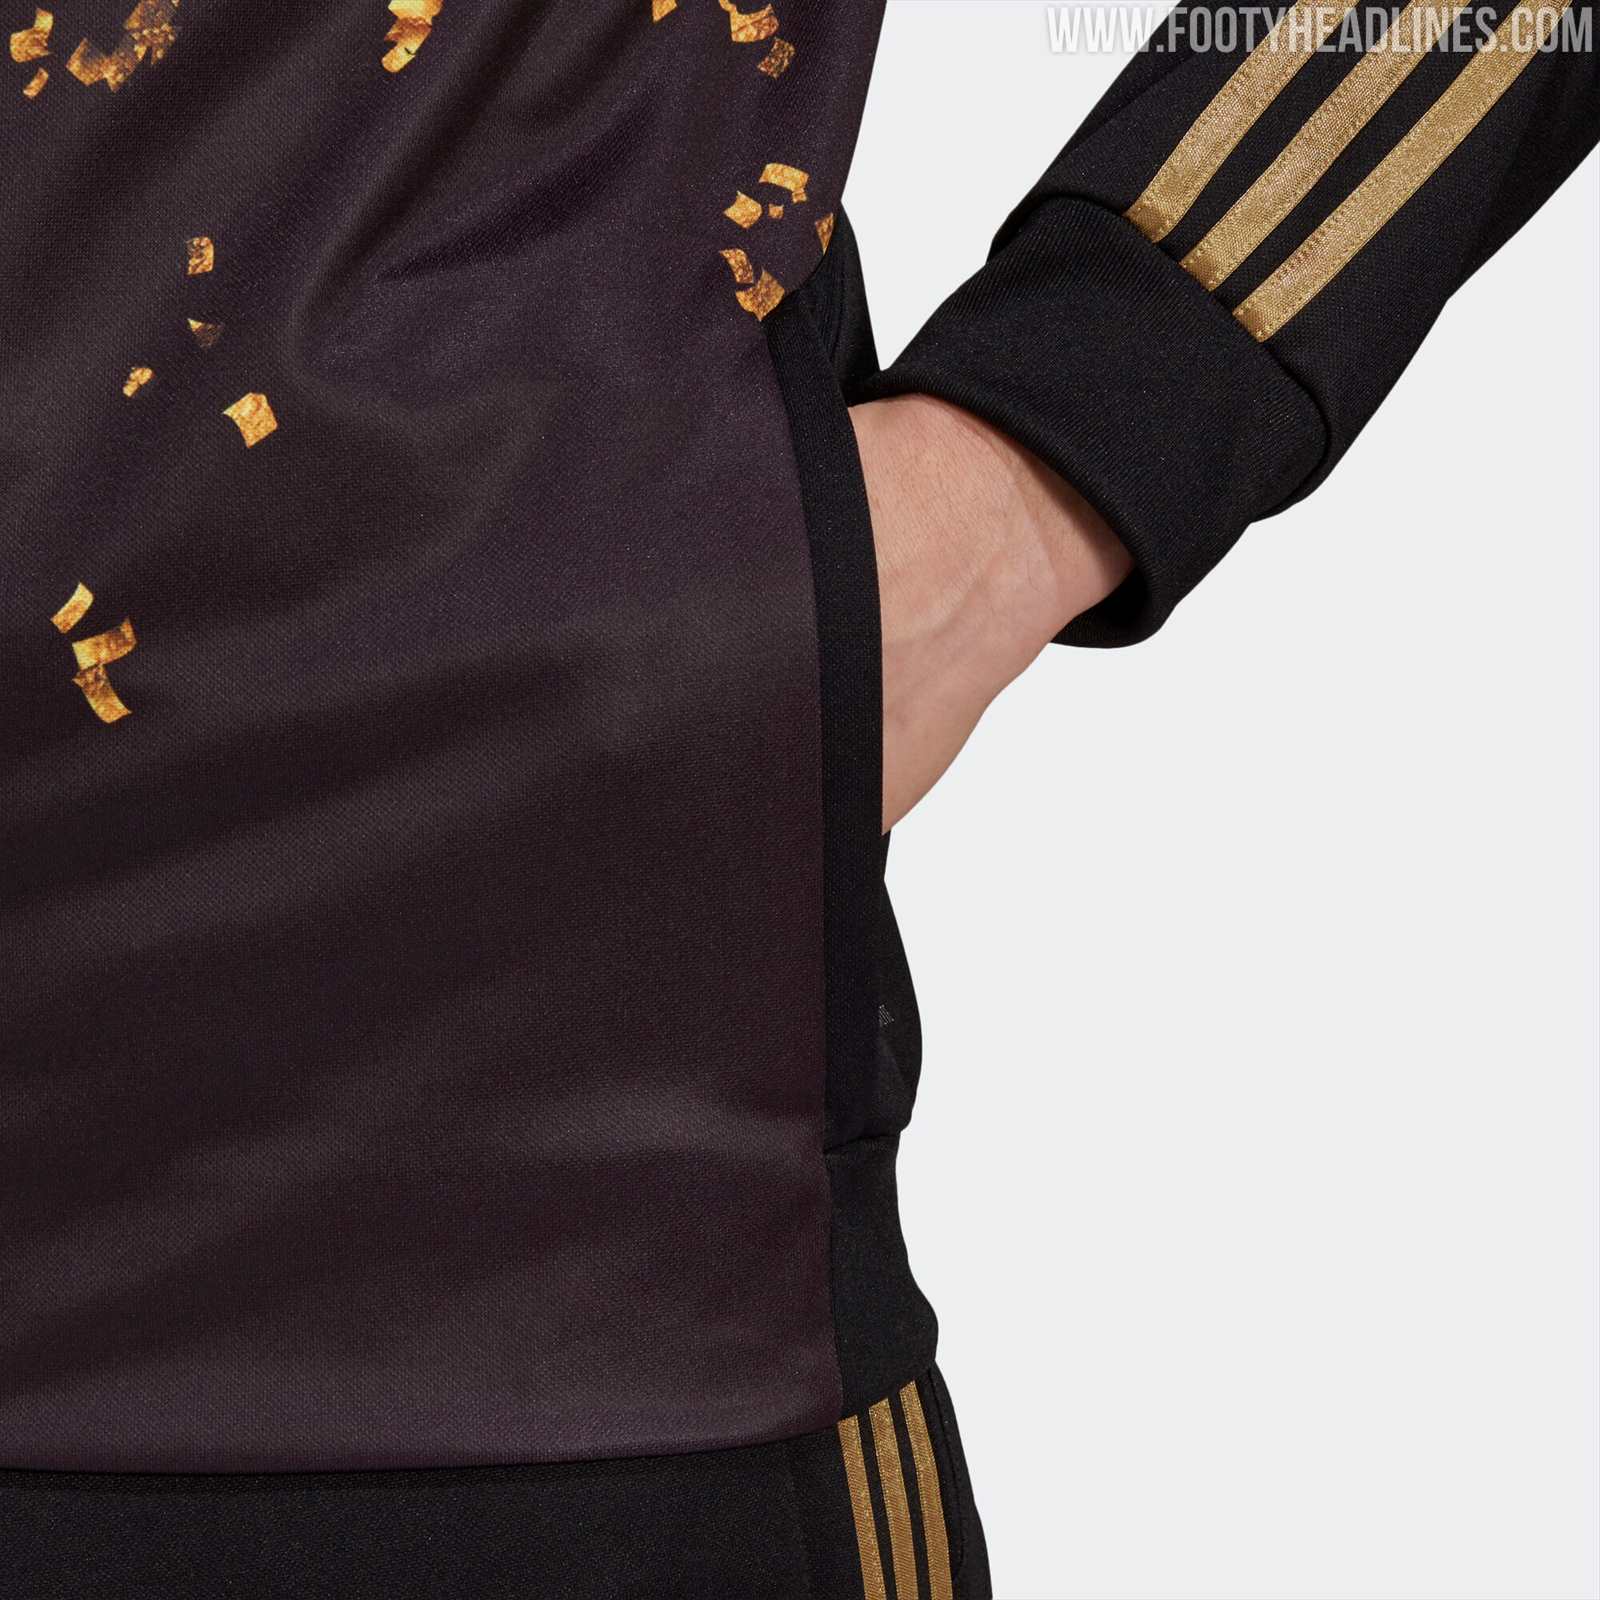 Spectacular Adidas Real Madrid 19-20 EA Sports Fourth Kit + Collection ...